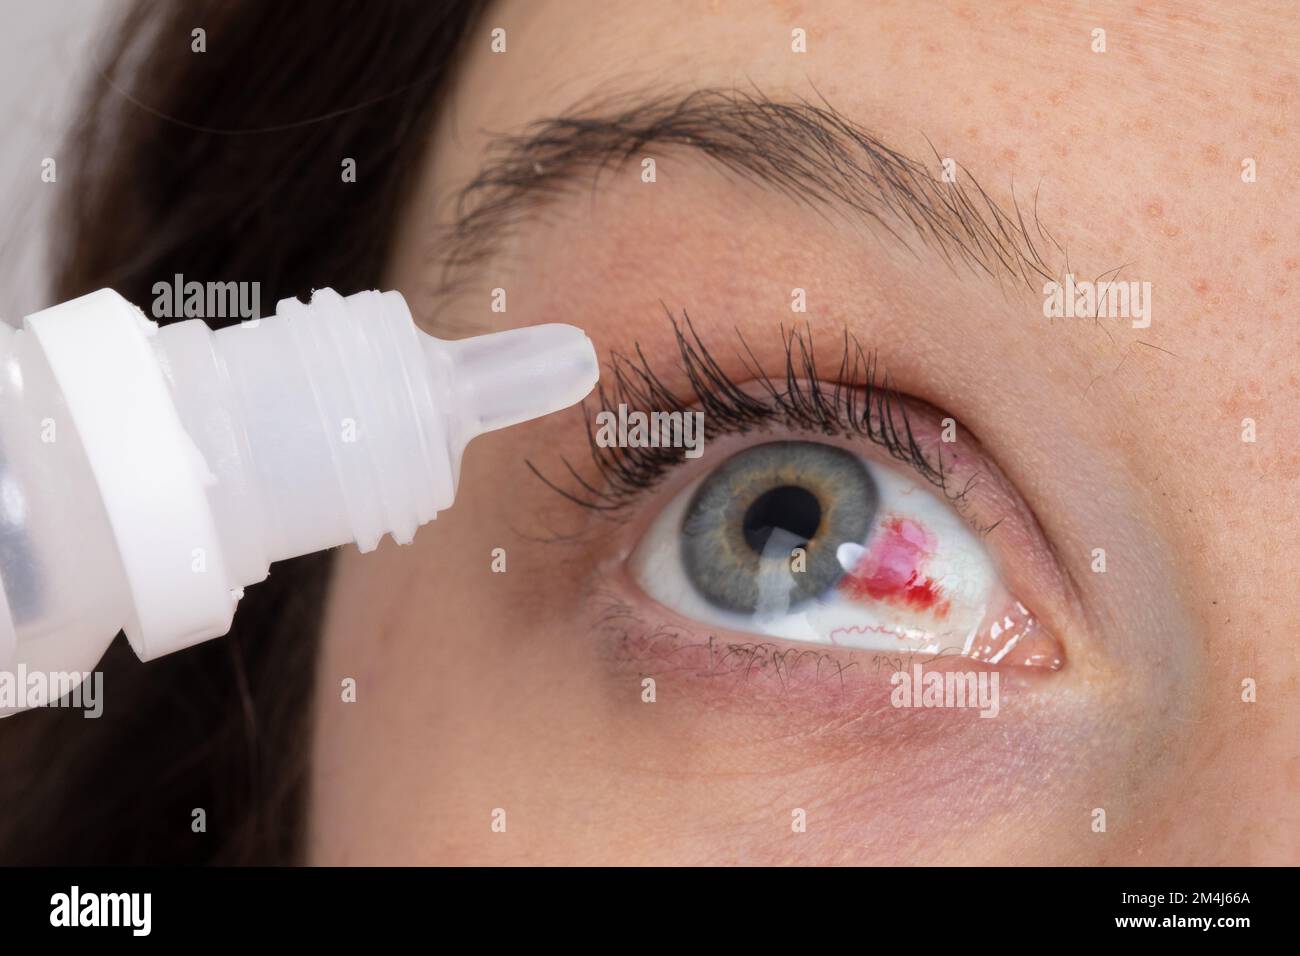 Primopian of a woman's eye with subcontractive hemorrhage that is given the eye drops. Red eye for the breakdown of capillaries due to cough or sternu Stock Photo